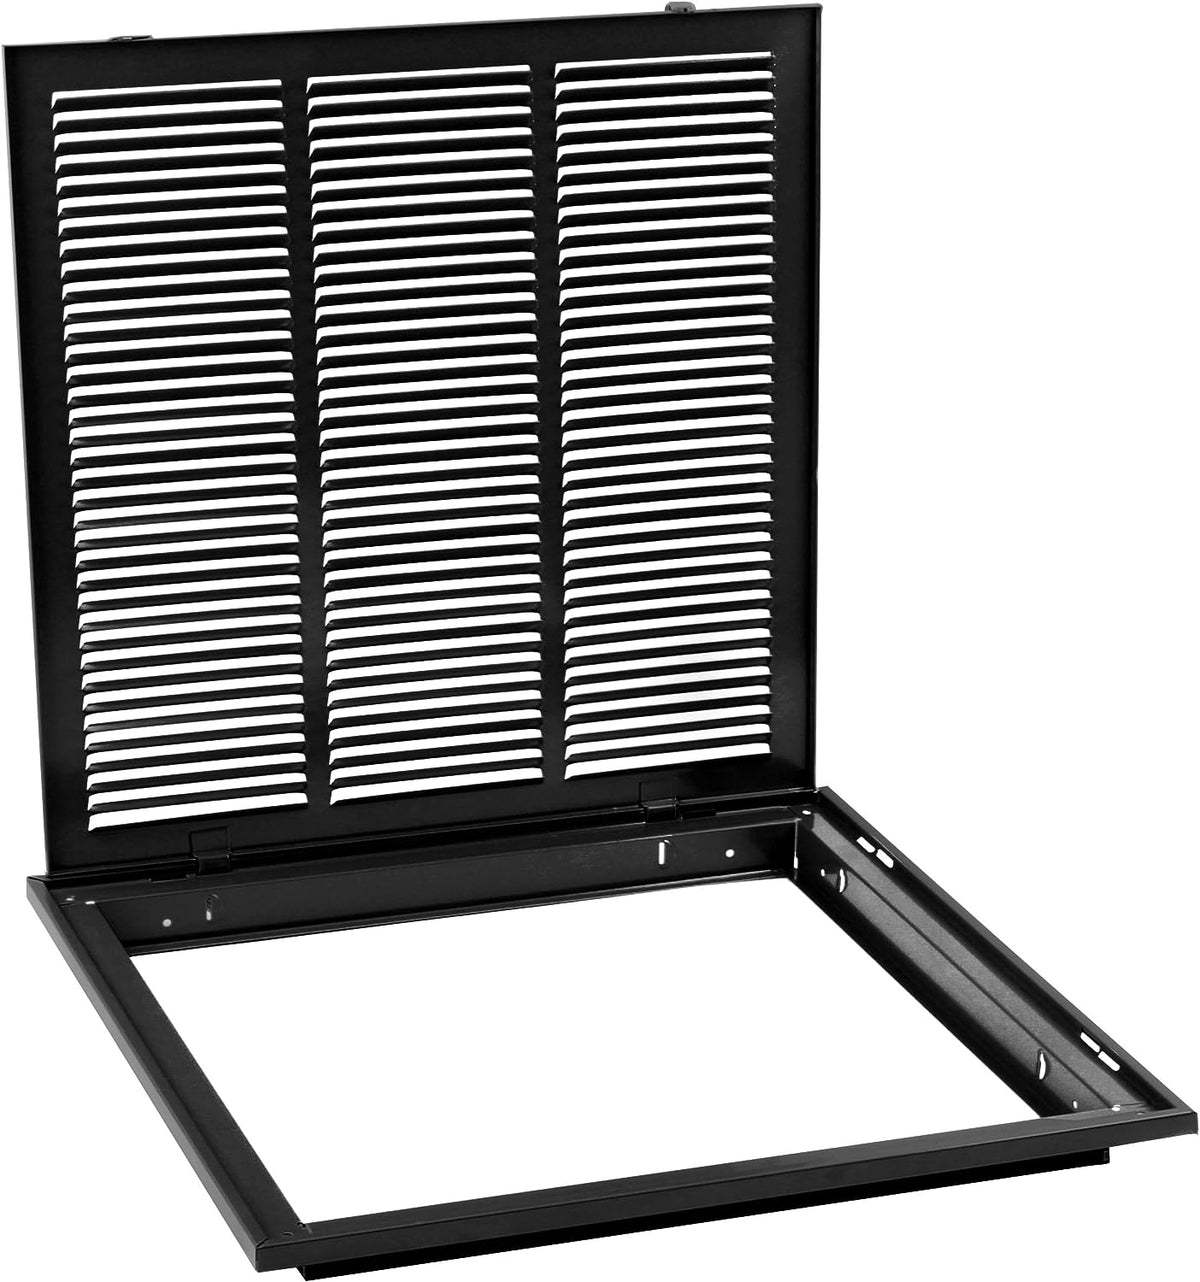 12&quot; X 12&quot; Steel Return Air Filter Grille for 1&quot; Filter - Removable Frame - Black - [Outer Dimensions: 14 5/8&quot; X 14 5/8&quot;]